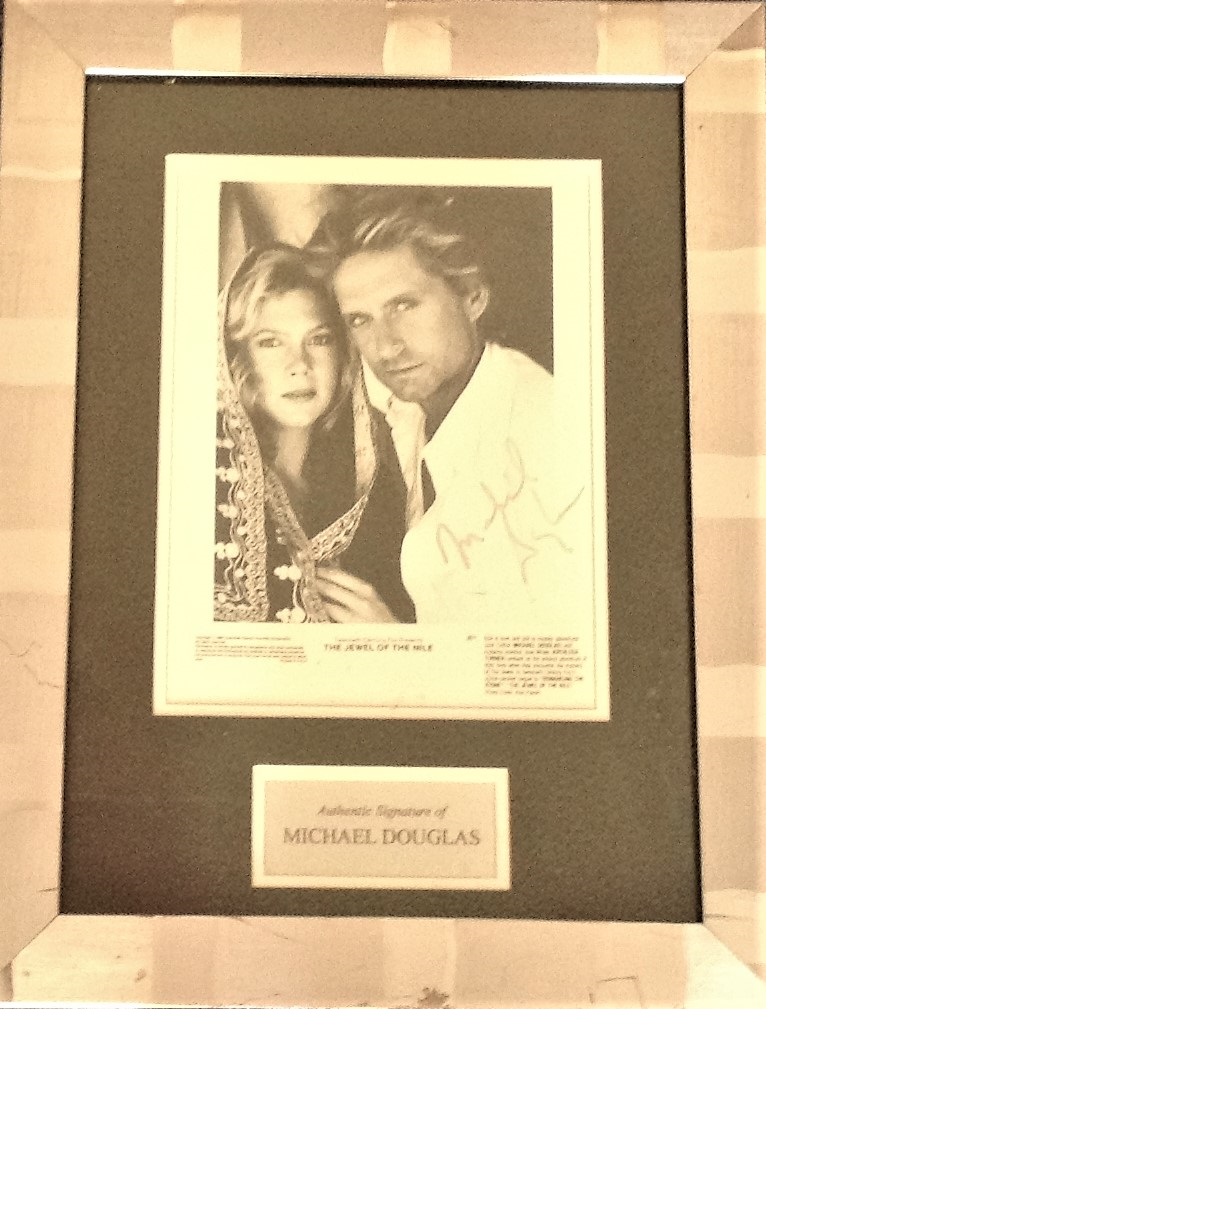 Michael Douglas signed b/w photo from The Jewel of the Nile. Mounted and framed to approx 18.5x14.